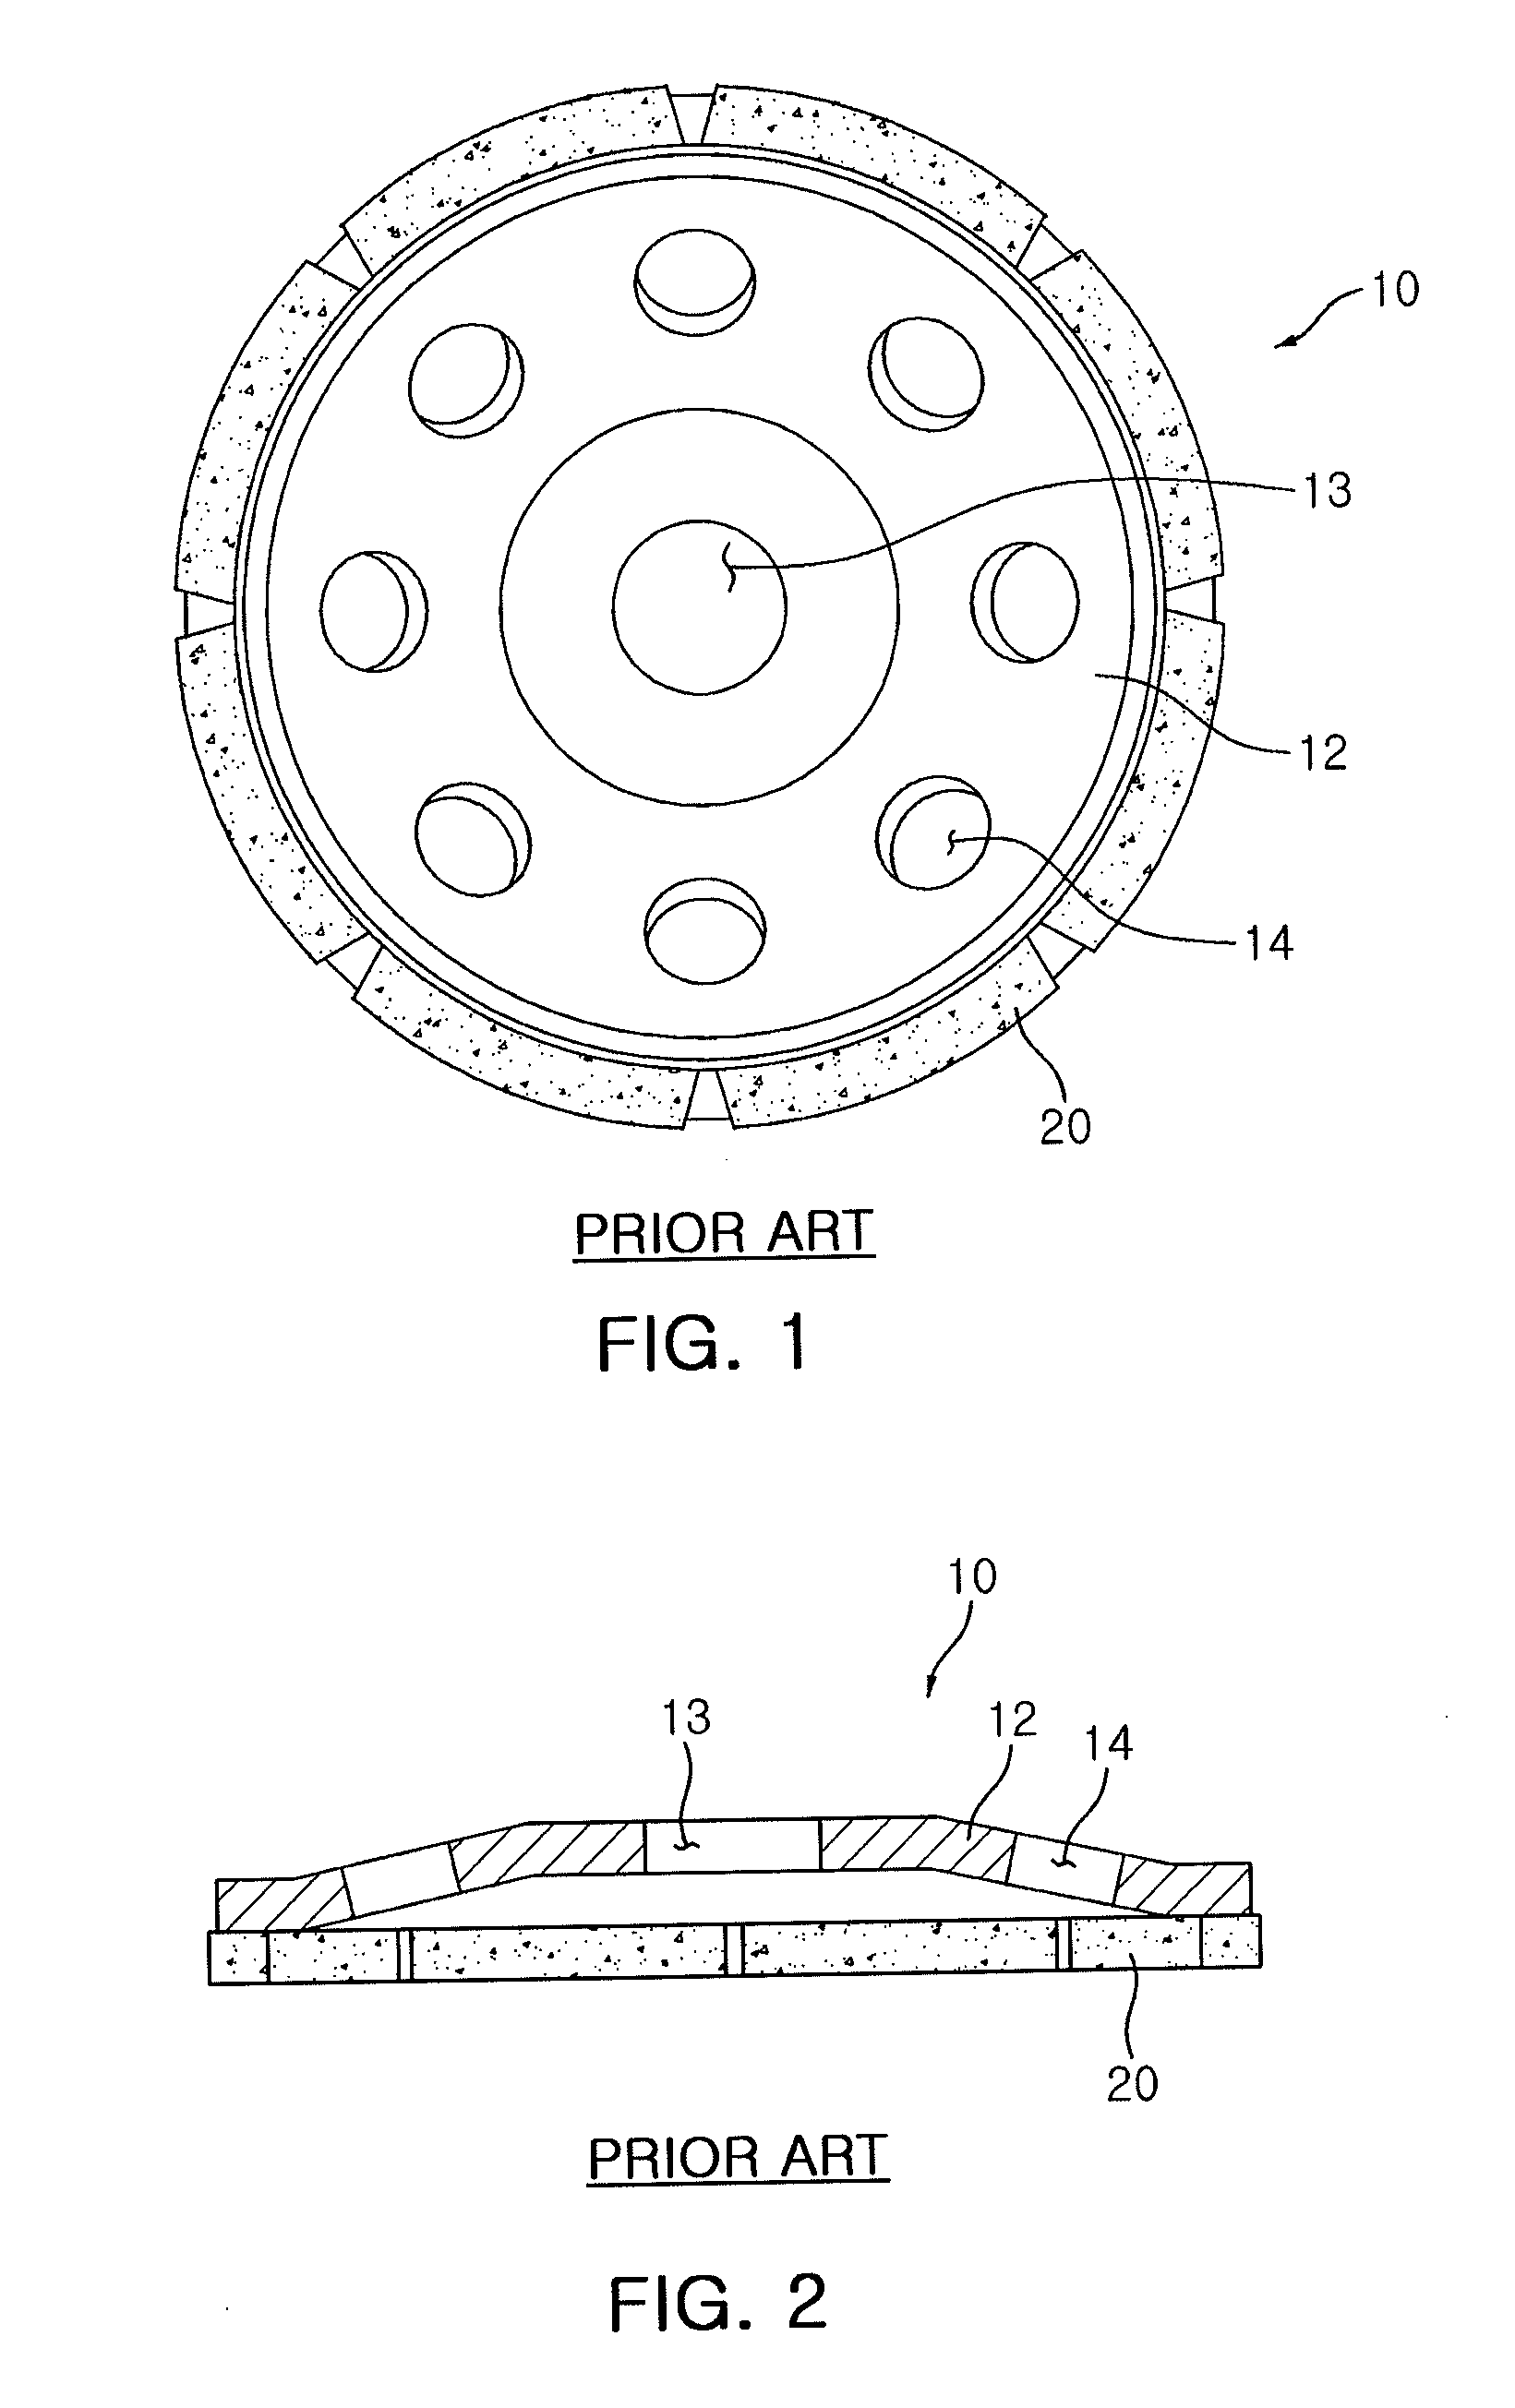 Grinding tool adapted to collect grinding particles